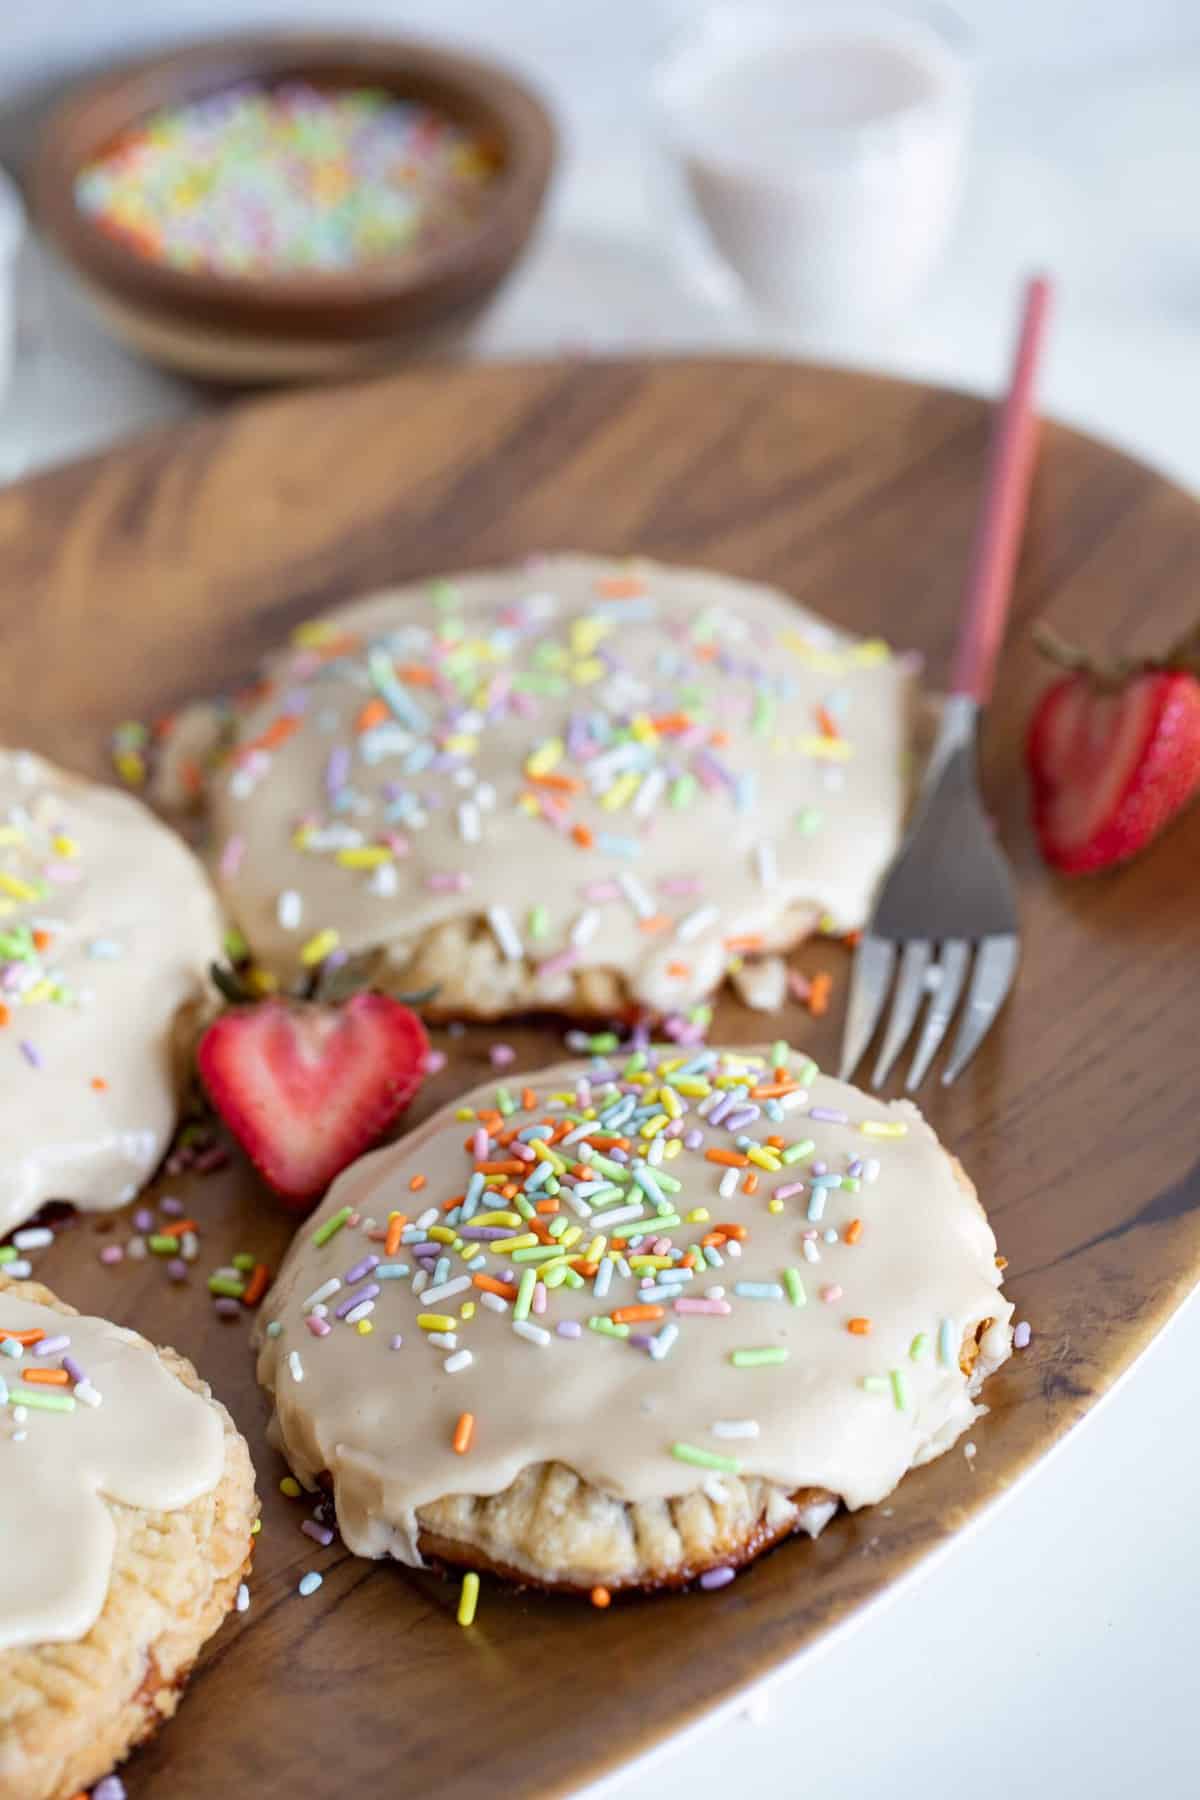 Homemade Vegan Strawberry Pop Tarts topped with sprinkles on a wooden plate.